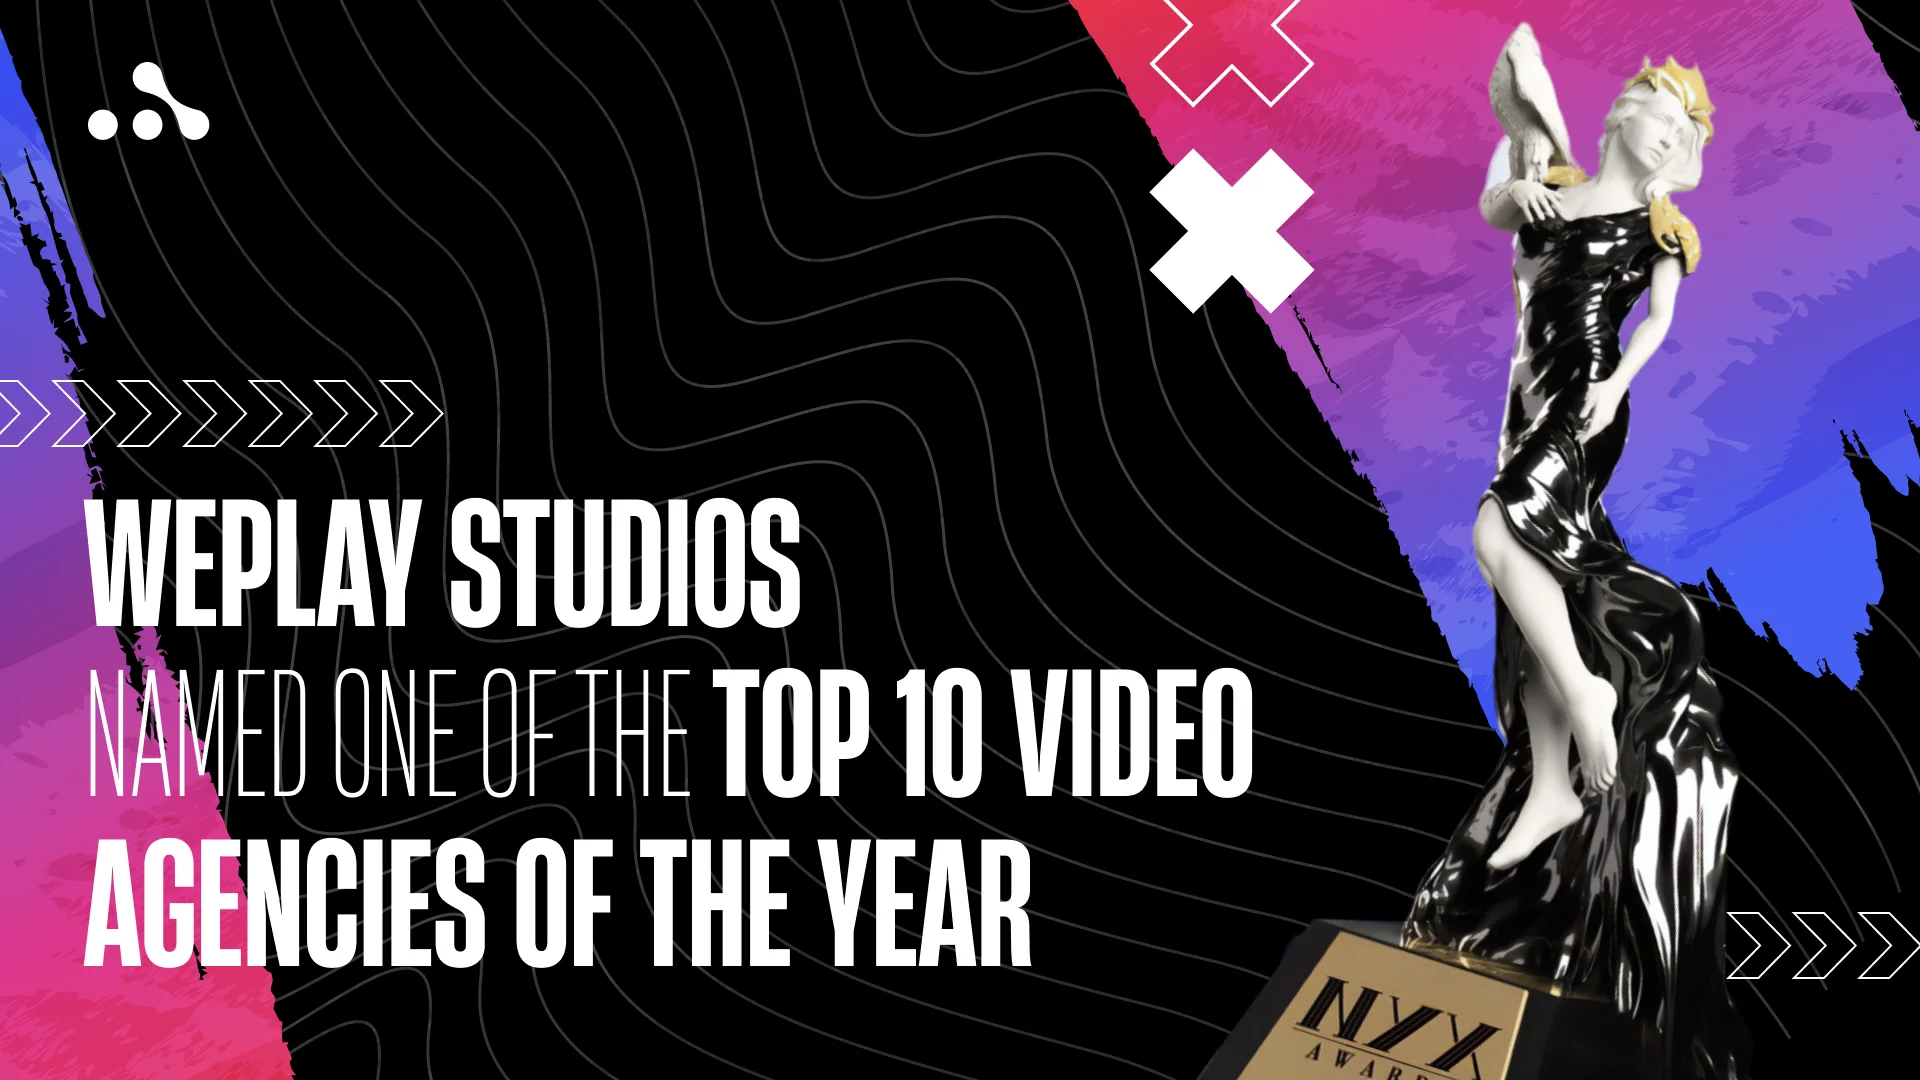 WePlay Studios named one of the top 10 Video Agencies of the Year. Visual: WePlay Holding